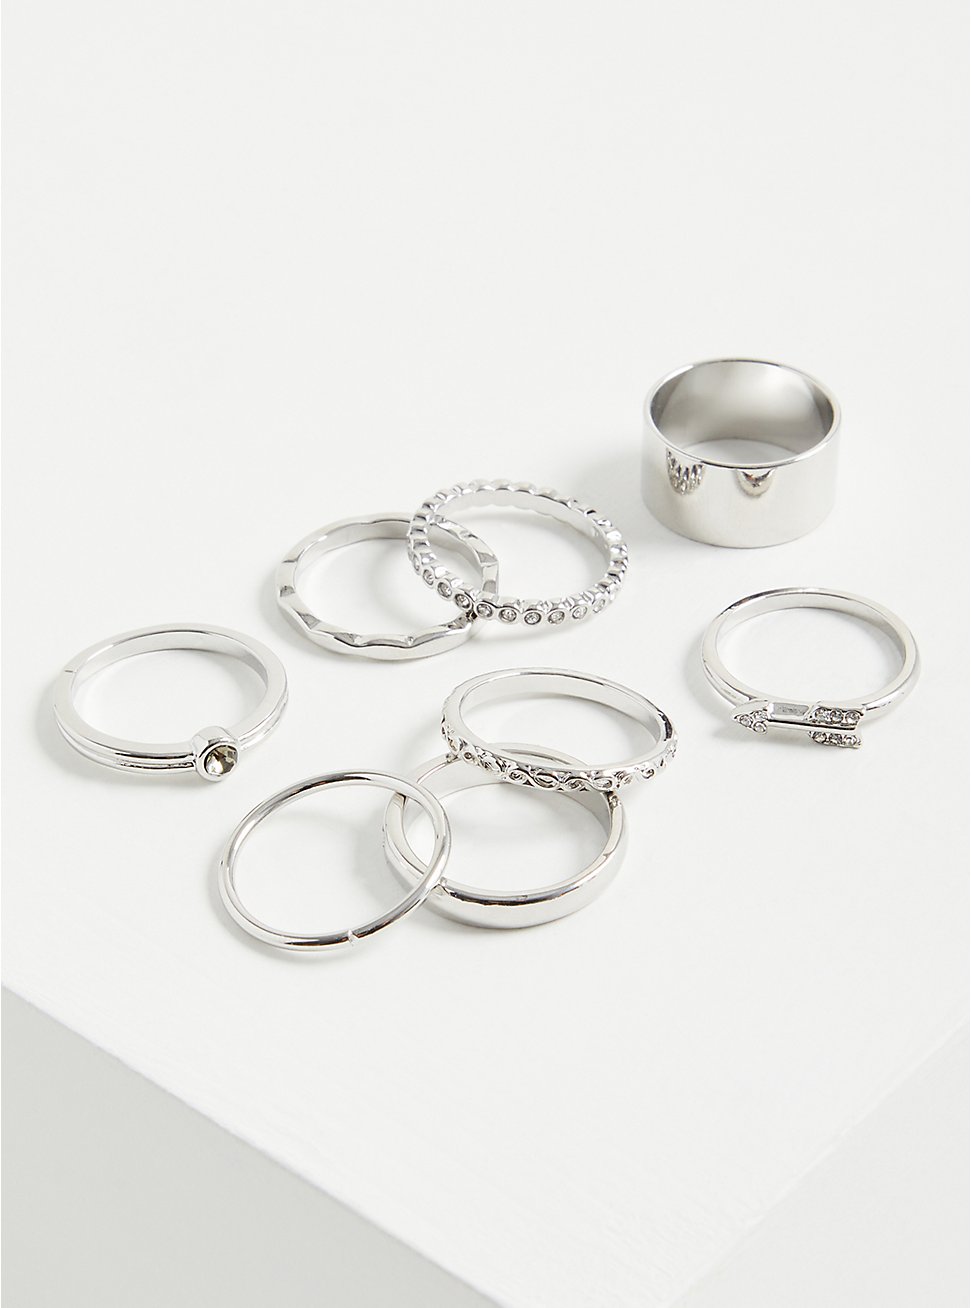 Arrow & Pave Ring Set of 8 - Silver Tone